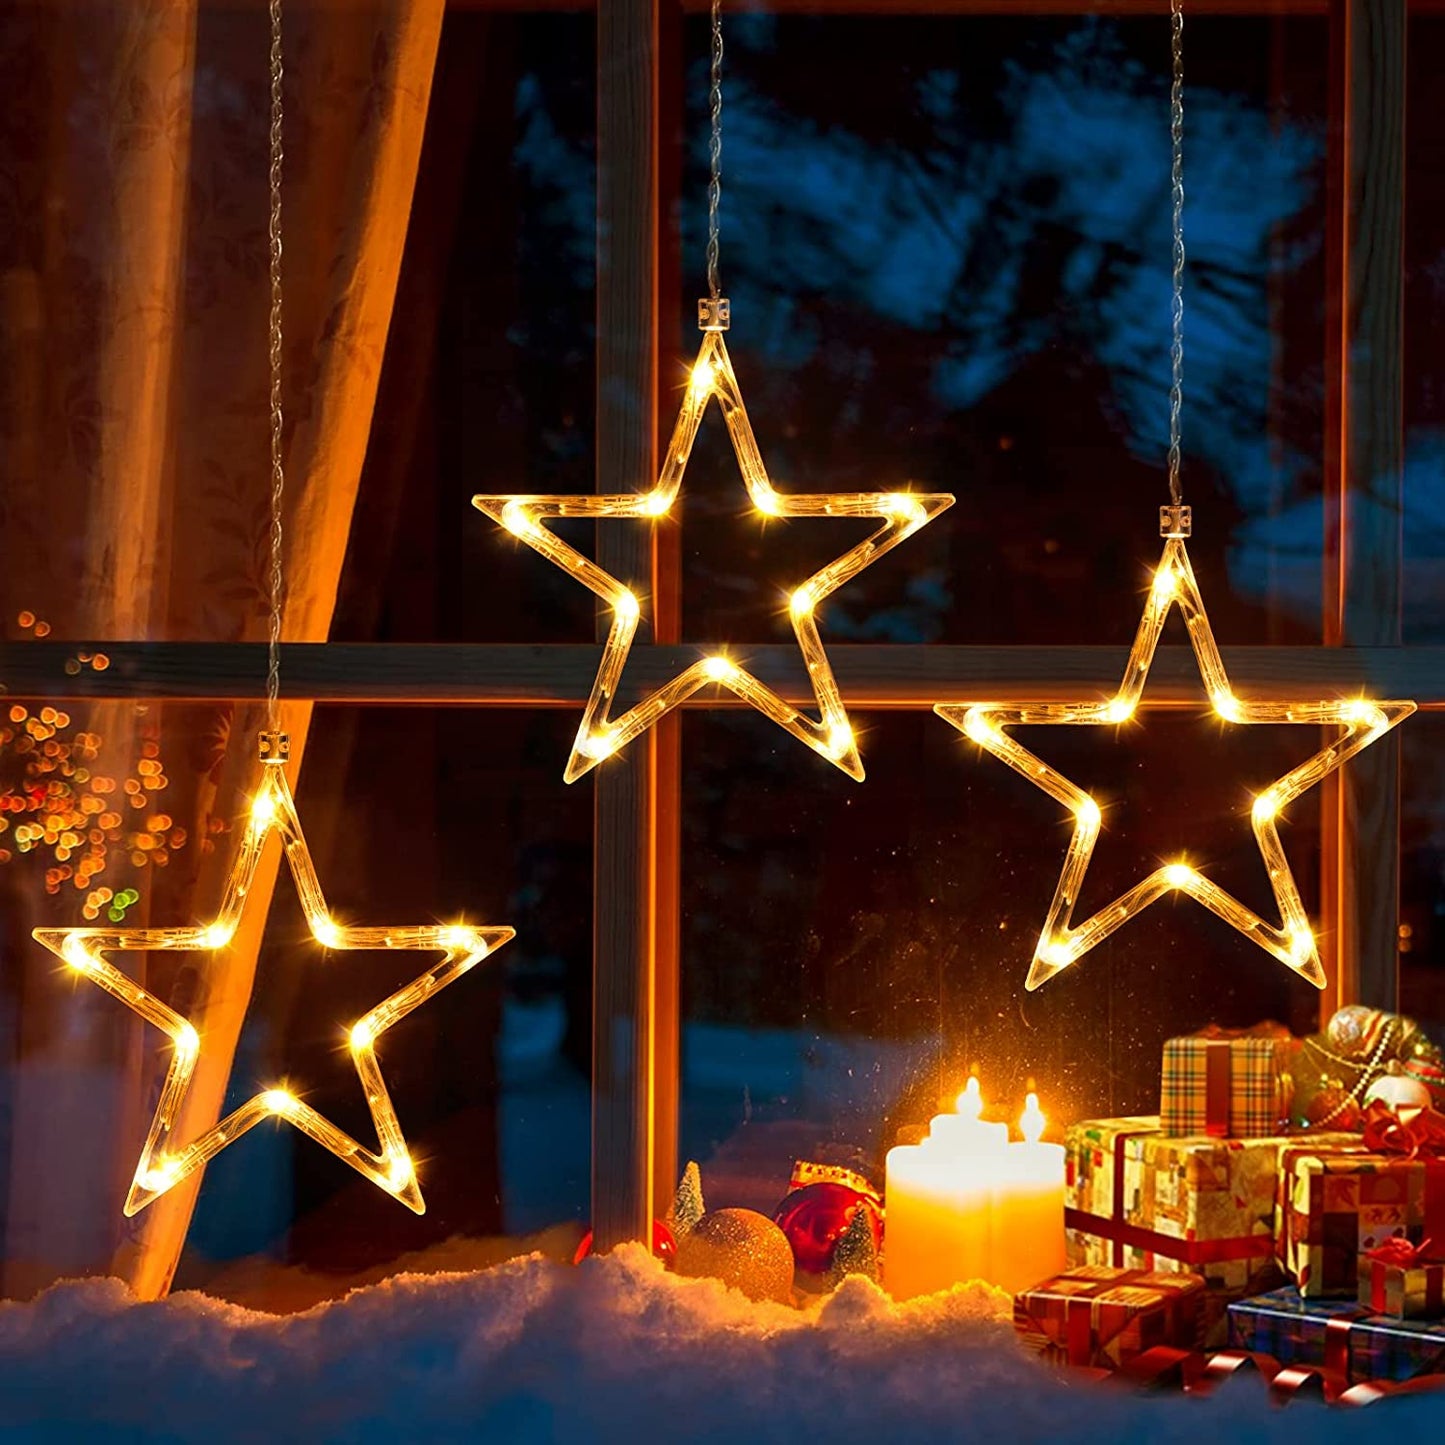 Chritmas Window Lights Indoor Outdoor, 3 Stars Lights 30 Leds Battery Operated Timer for Hanging 8 Modes Warm White Star String Lights, Xtmas Lights Decorative Light for Window, Door, Wall